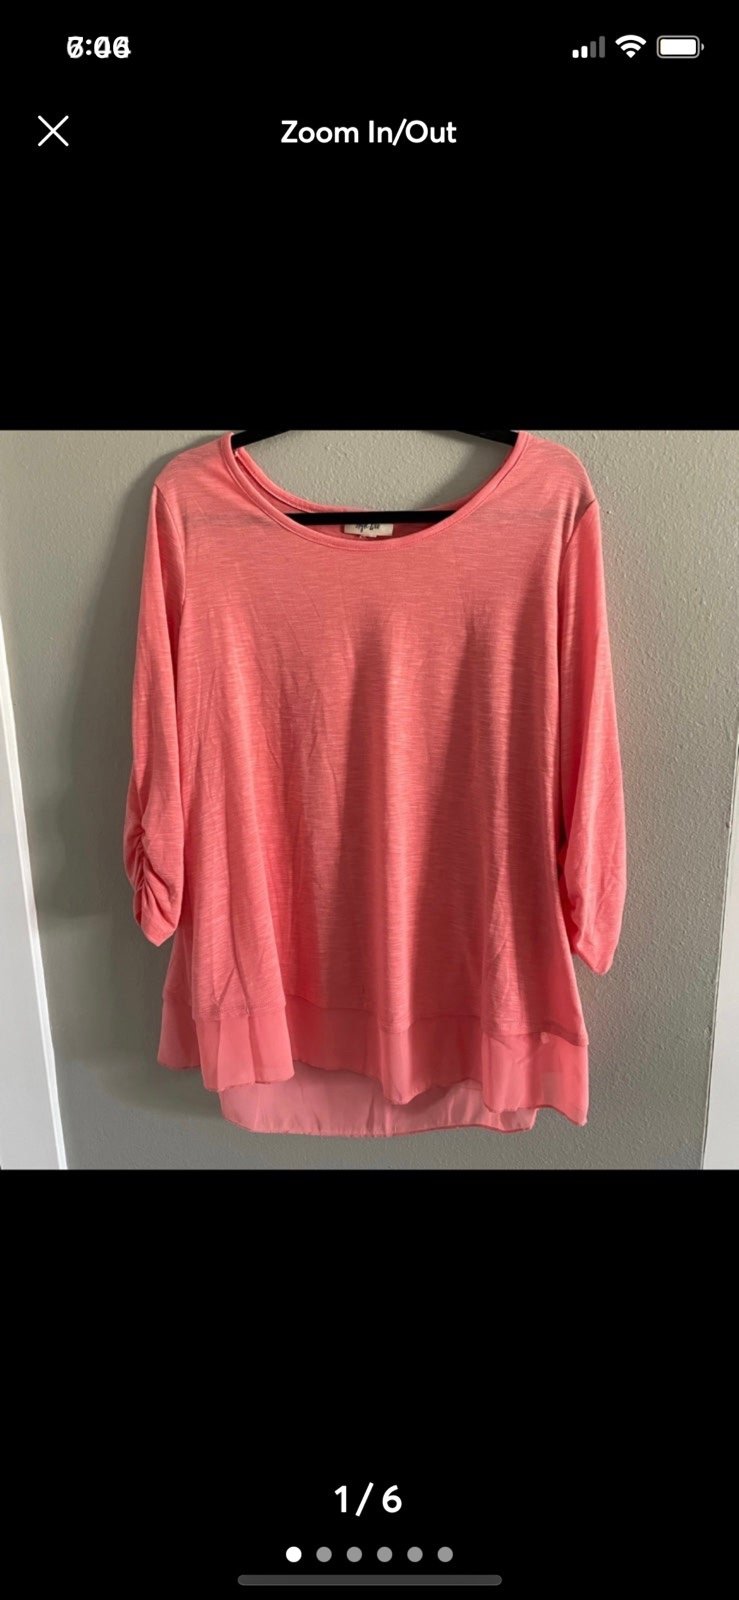 cheapest place to buy  Style & Co Coral Top 0X P6EsU9nxO Zero Profit 